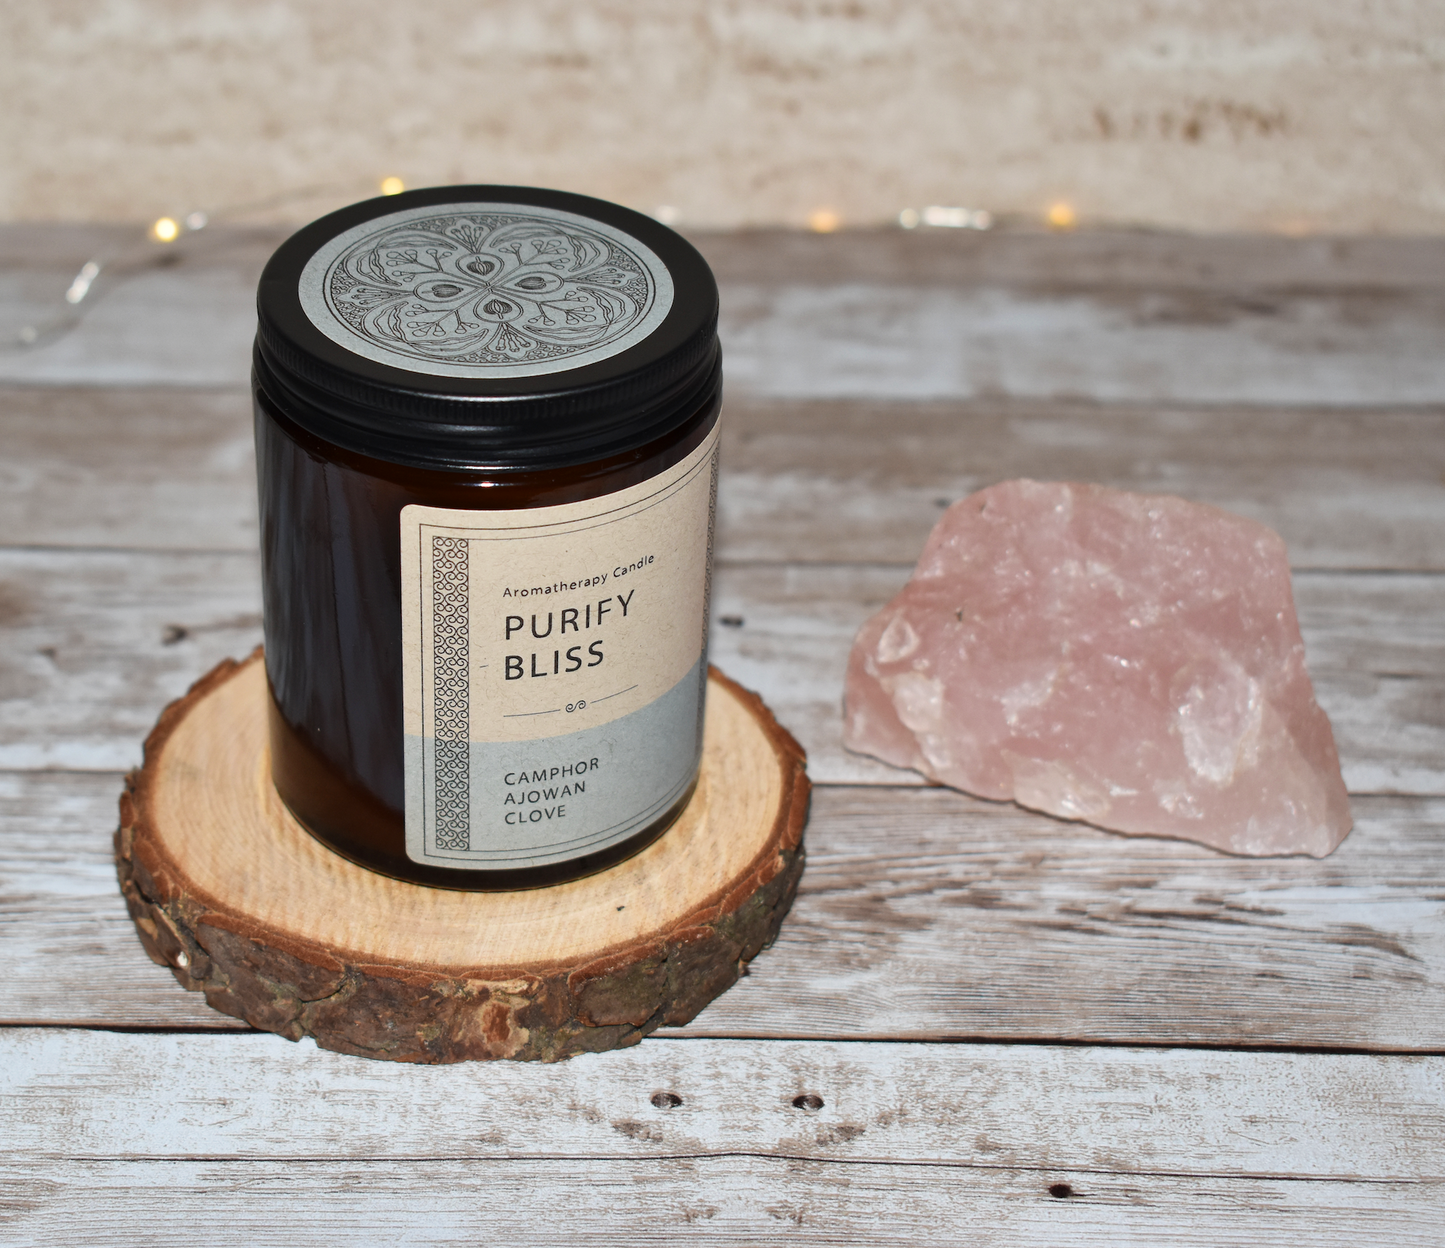 Purify Your Space with our "Purify Bliss" Aromatherapy Candle: Camphor, Ajowan & Clove Bud Essential Oils